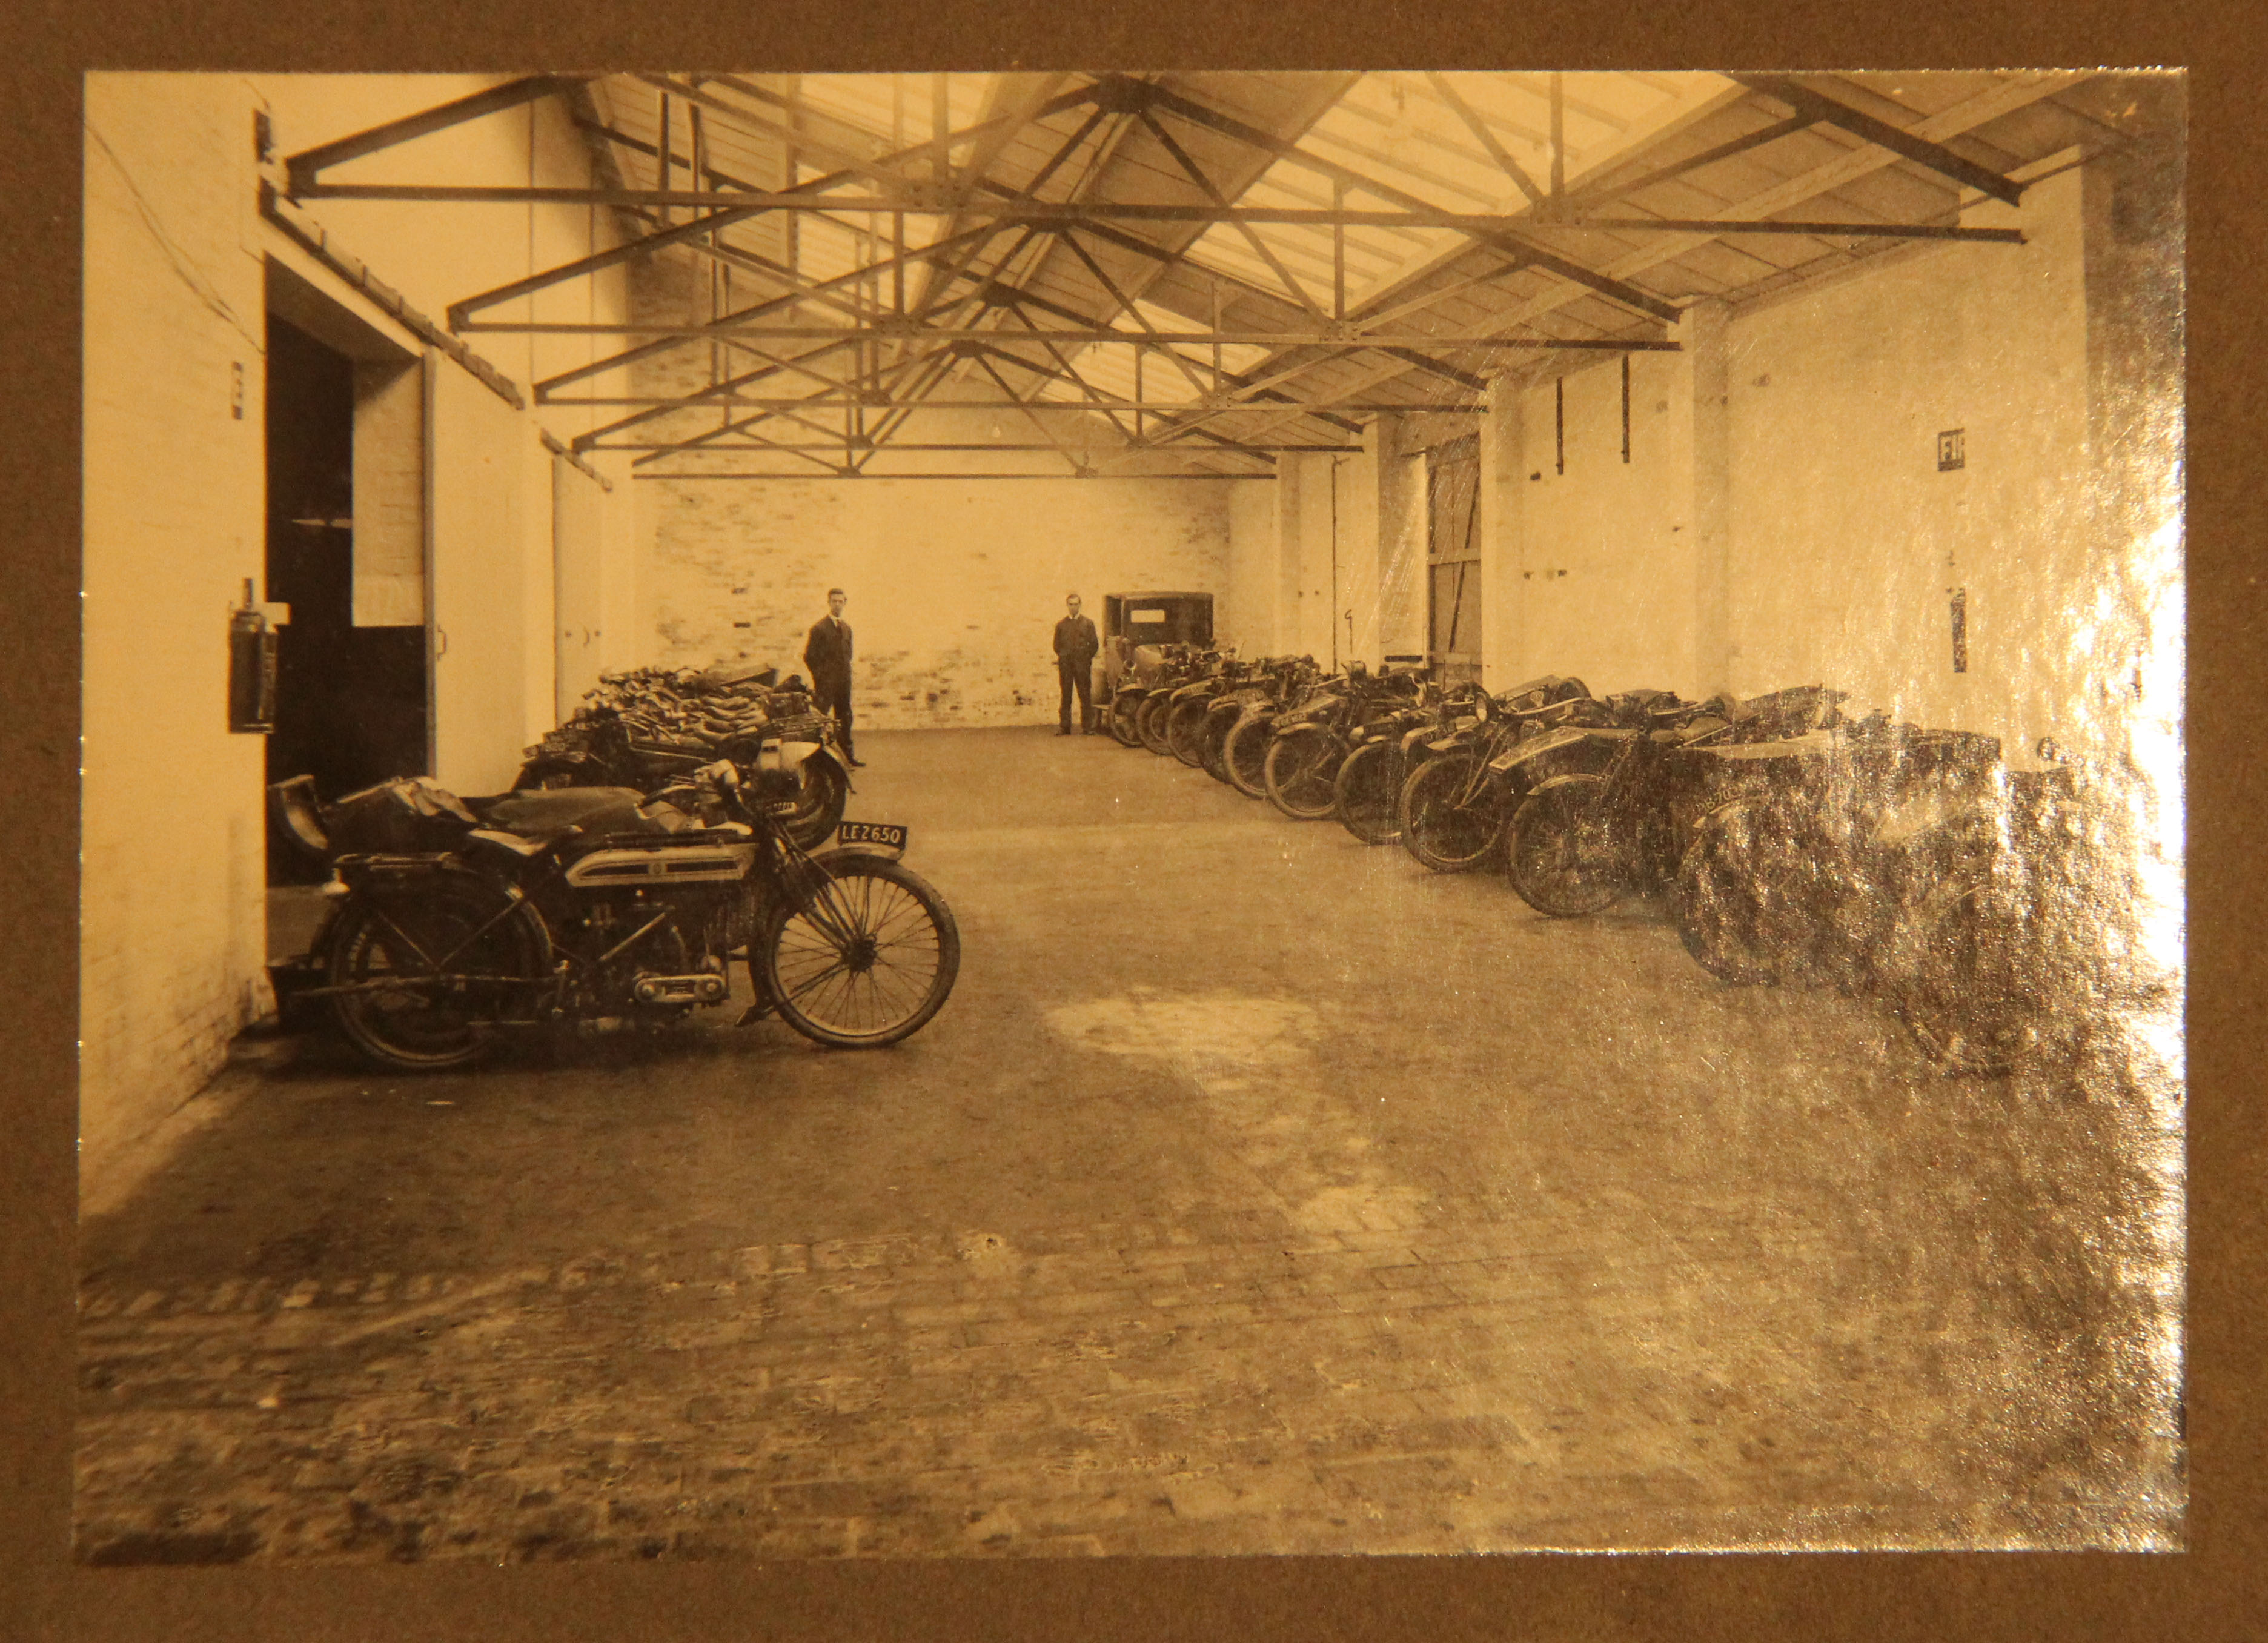 The Birmingham Garages Ltd. Authorised Dealers for Wolseley Cars. - Image 6 of 12